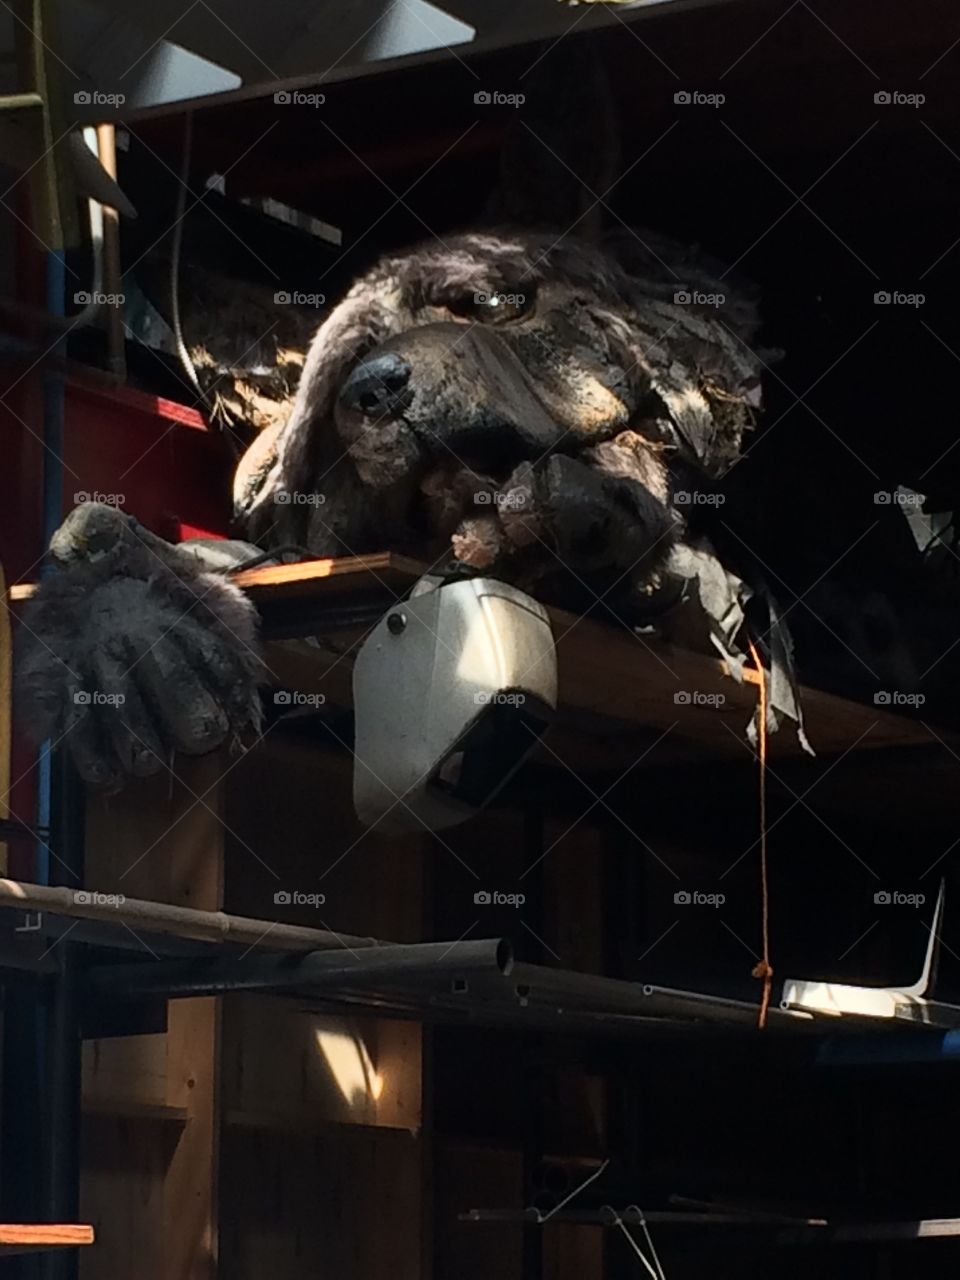 Wolf that was at a game of thrones preview or something like that. Found in Atlanta.